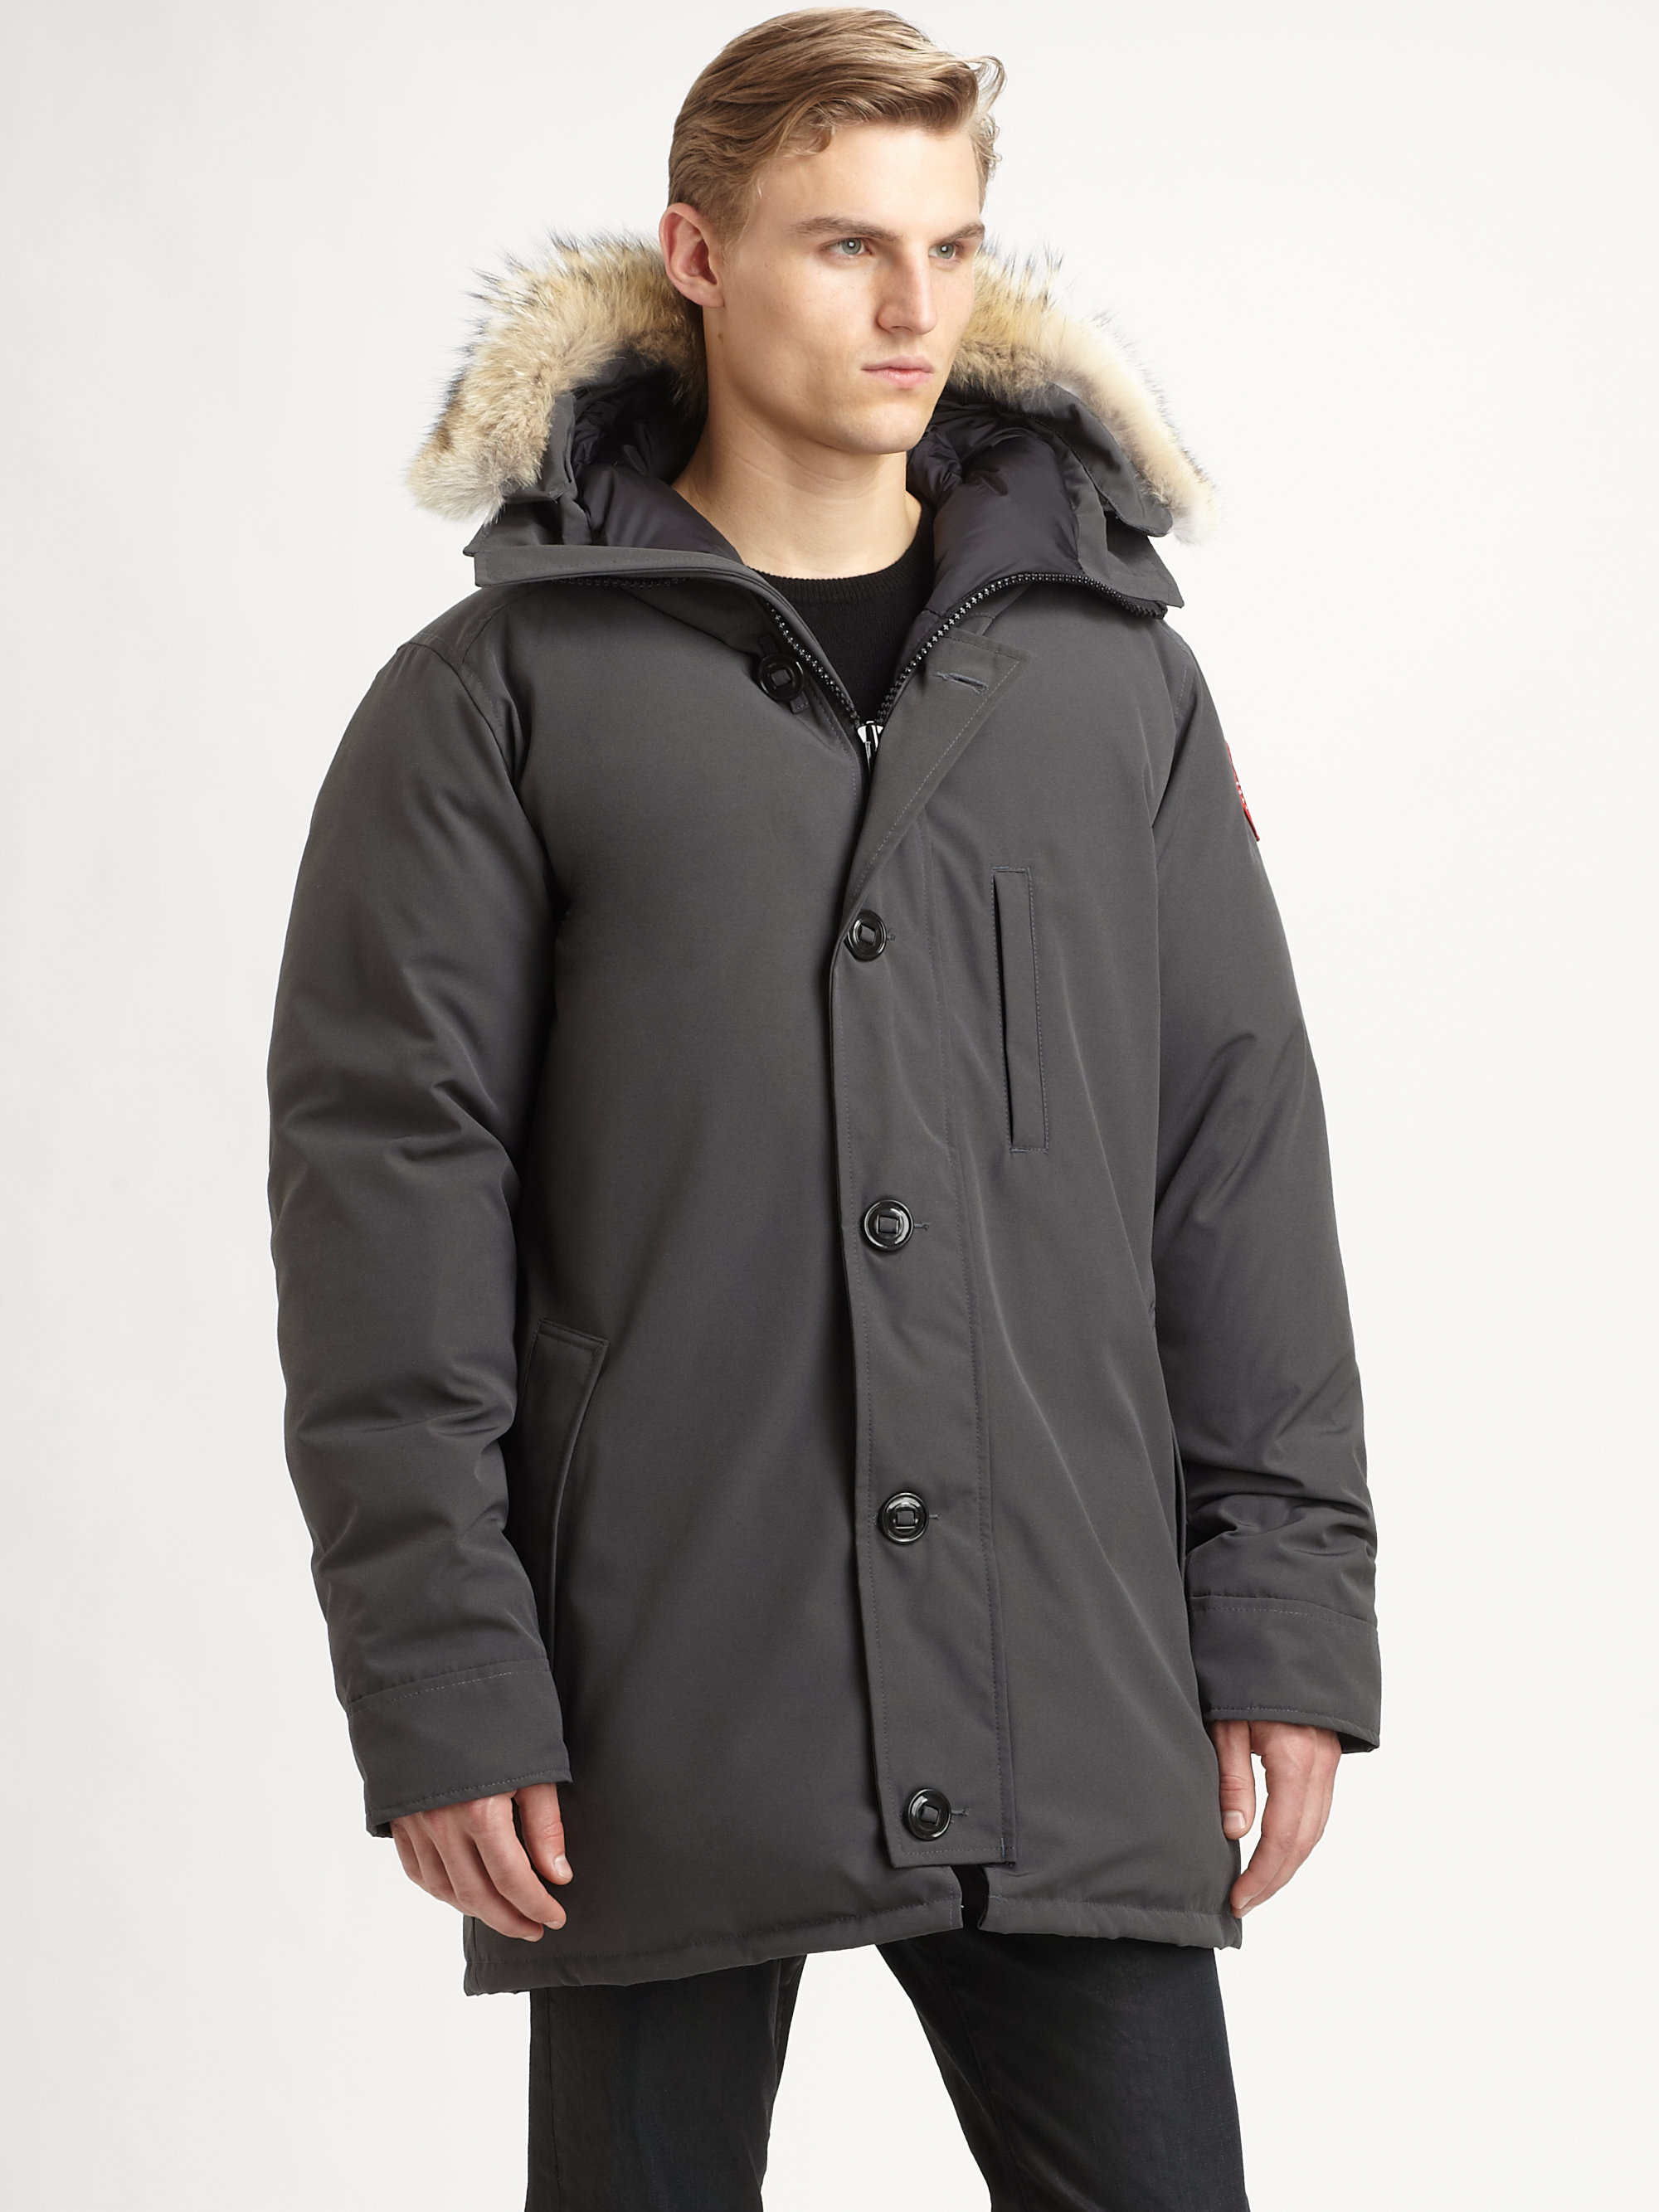 Canada Goose Chateau Parka In Gray For Men Graphite Lyst